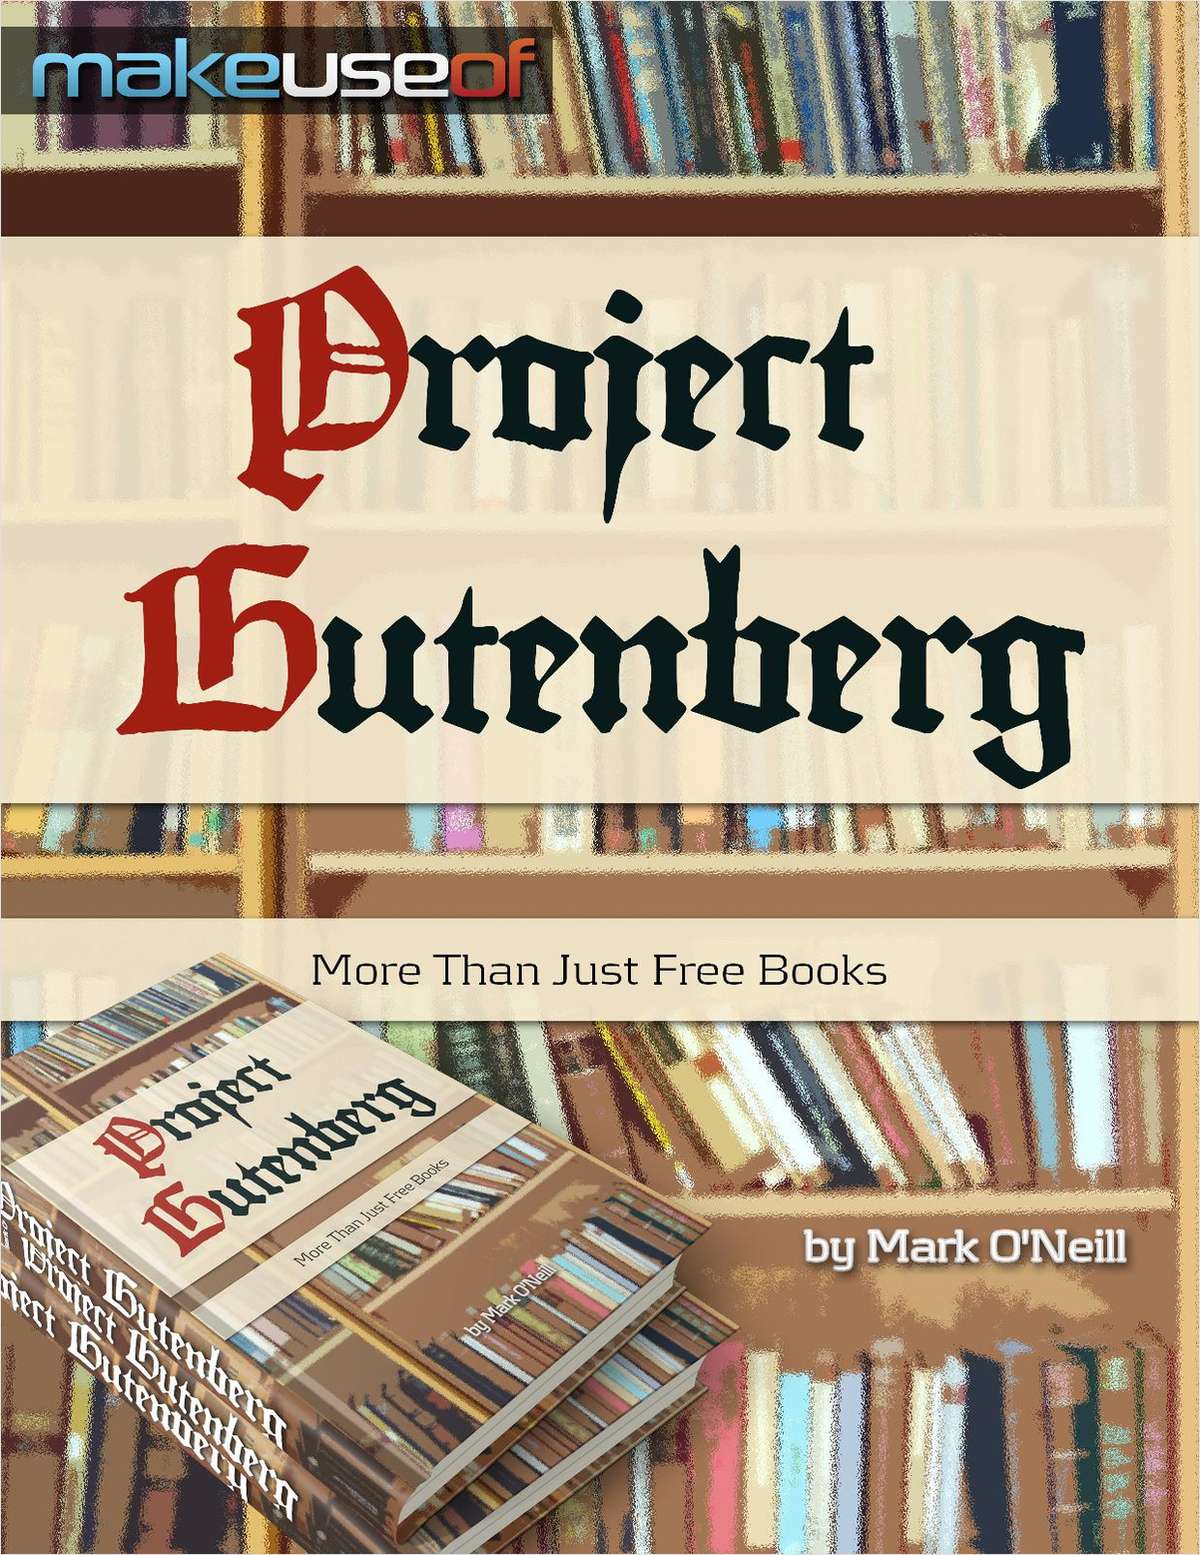 Project Gutenberg: More Than Just Free Books